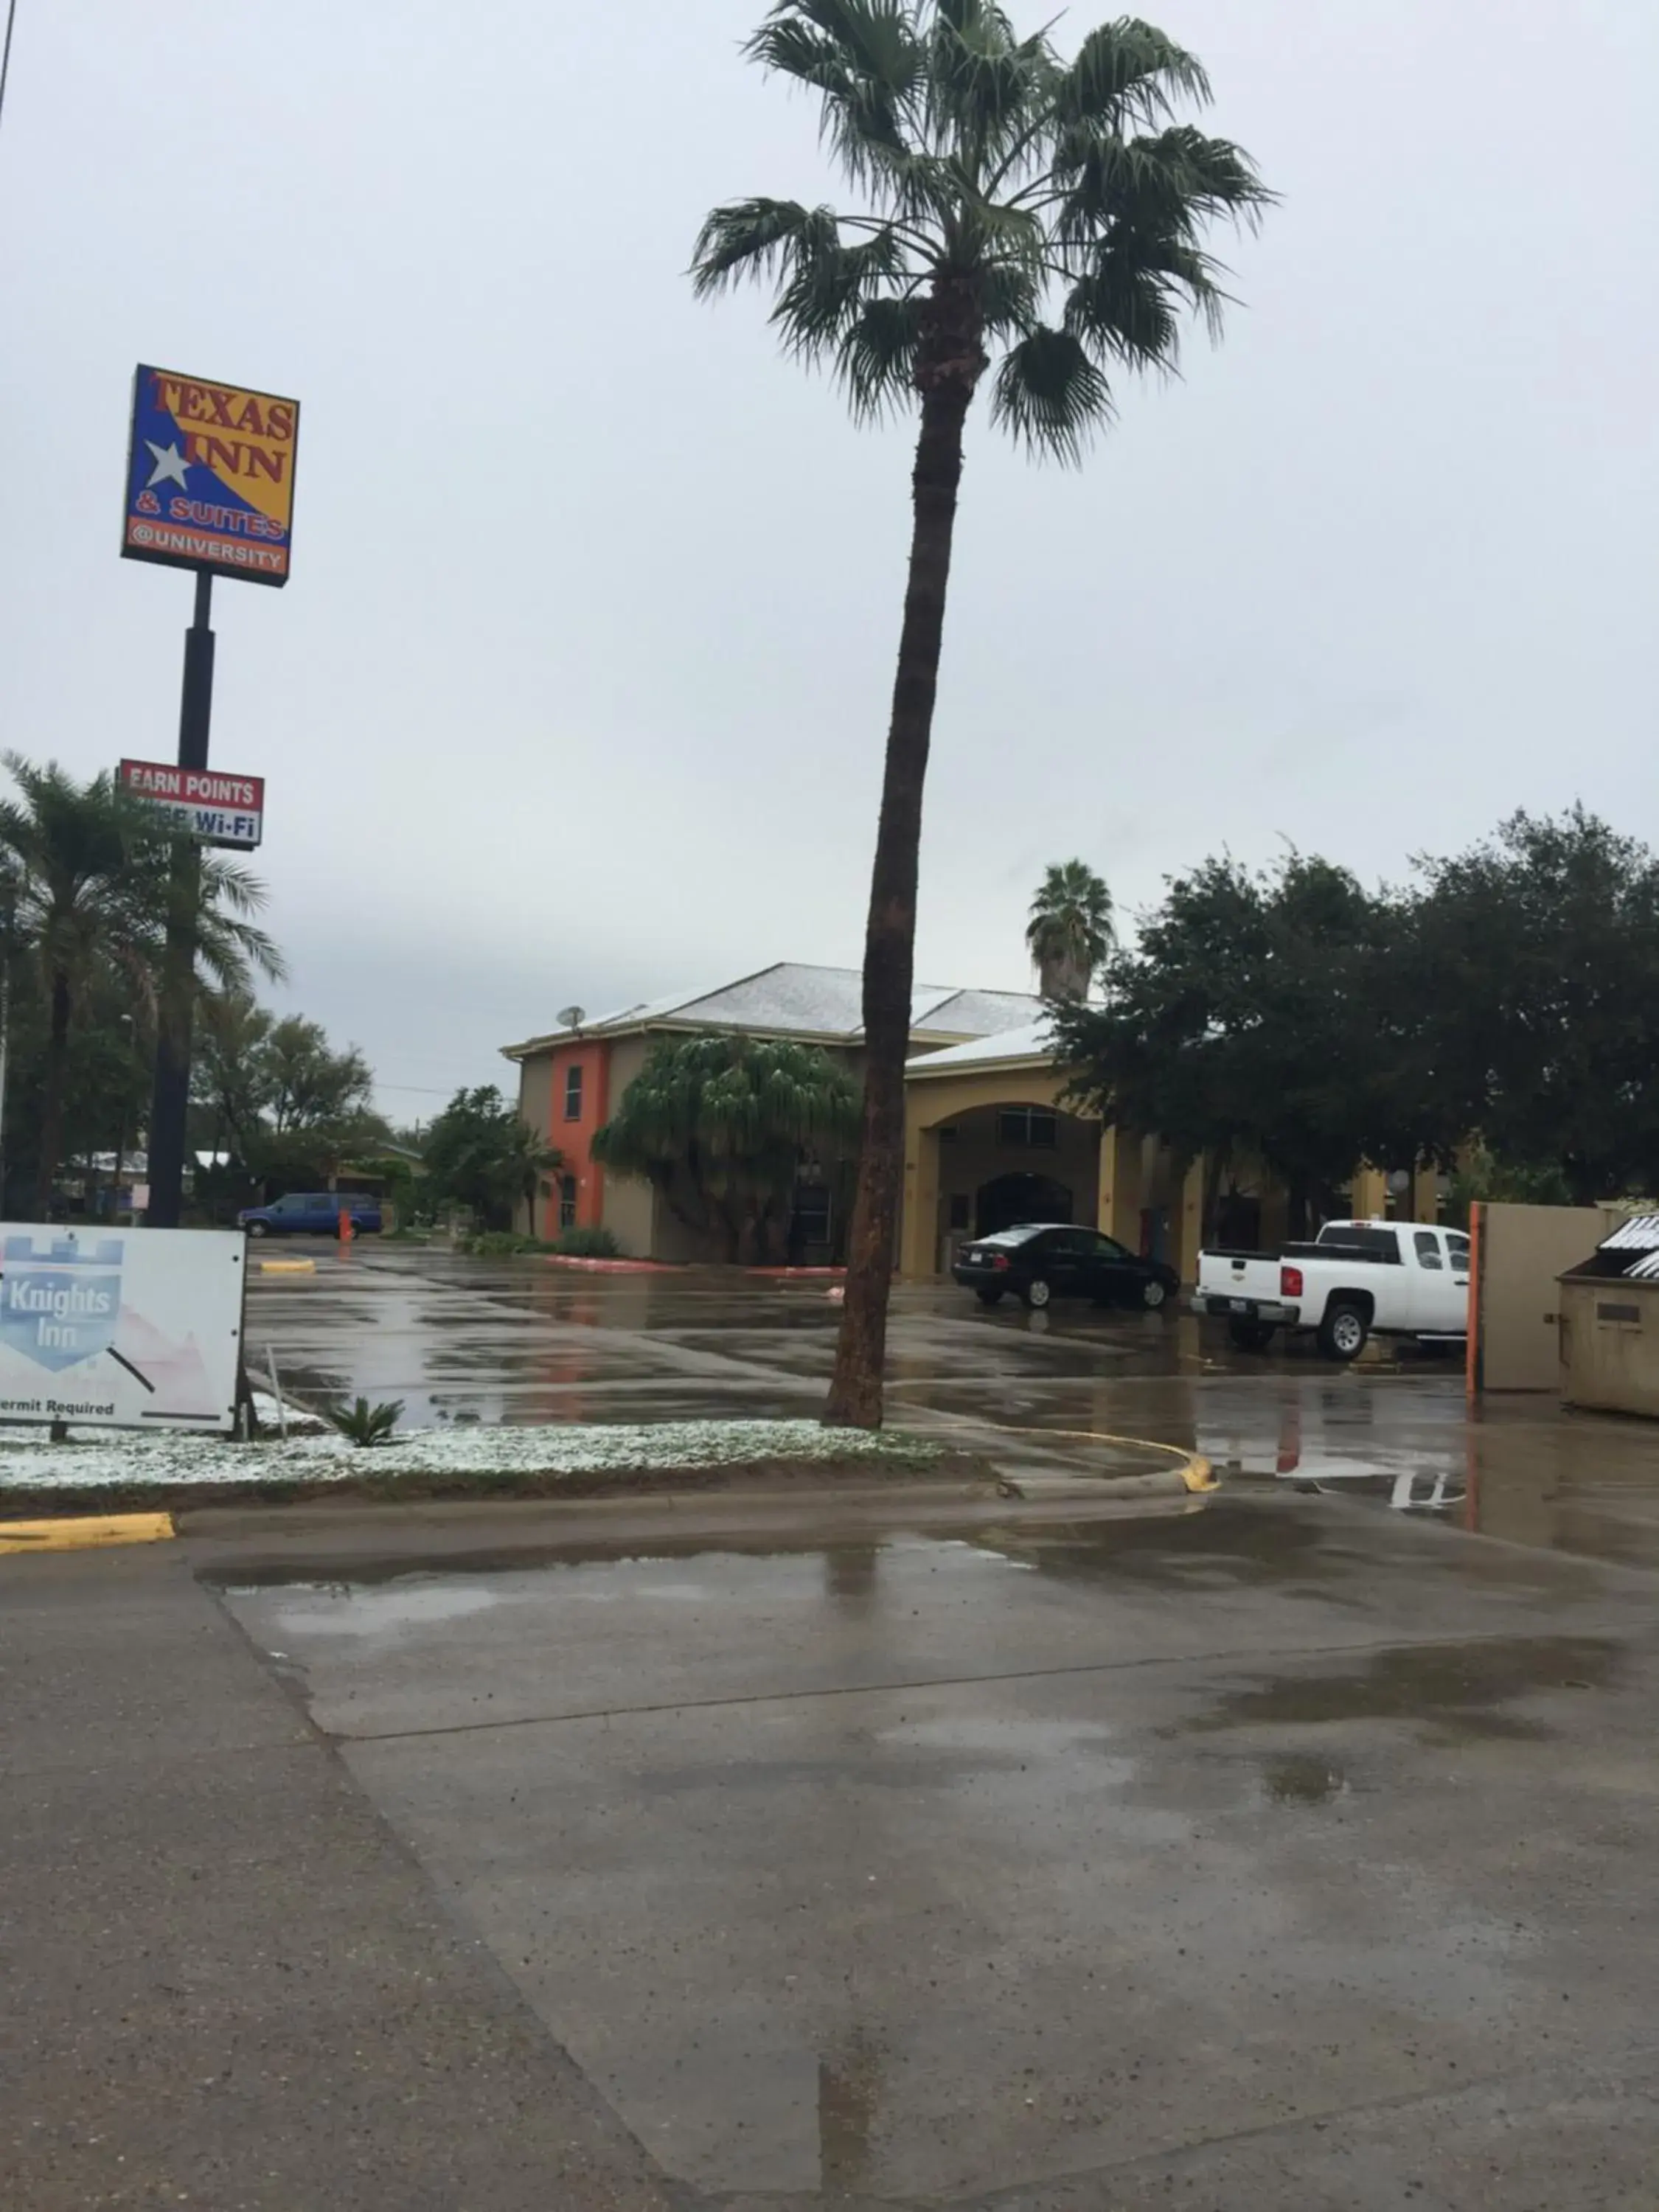 Parking in Texas Inn and Suites City Center at University Dr.